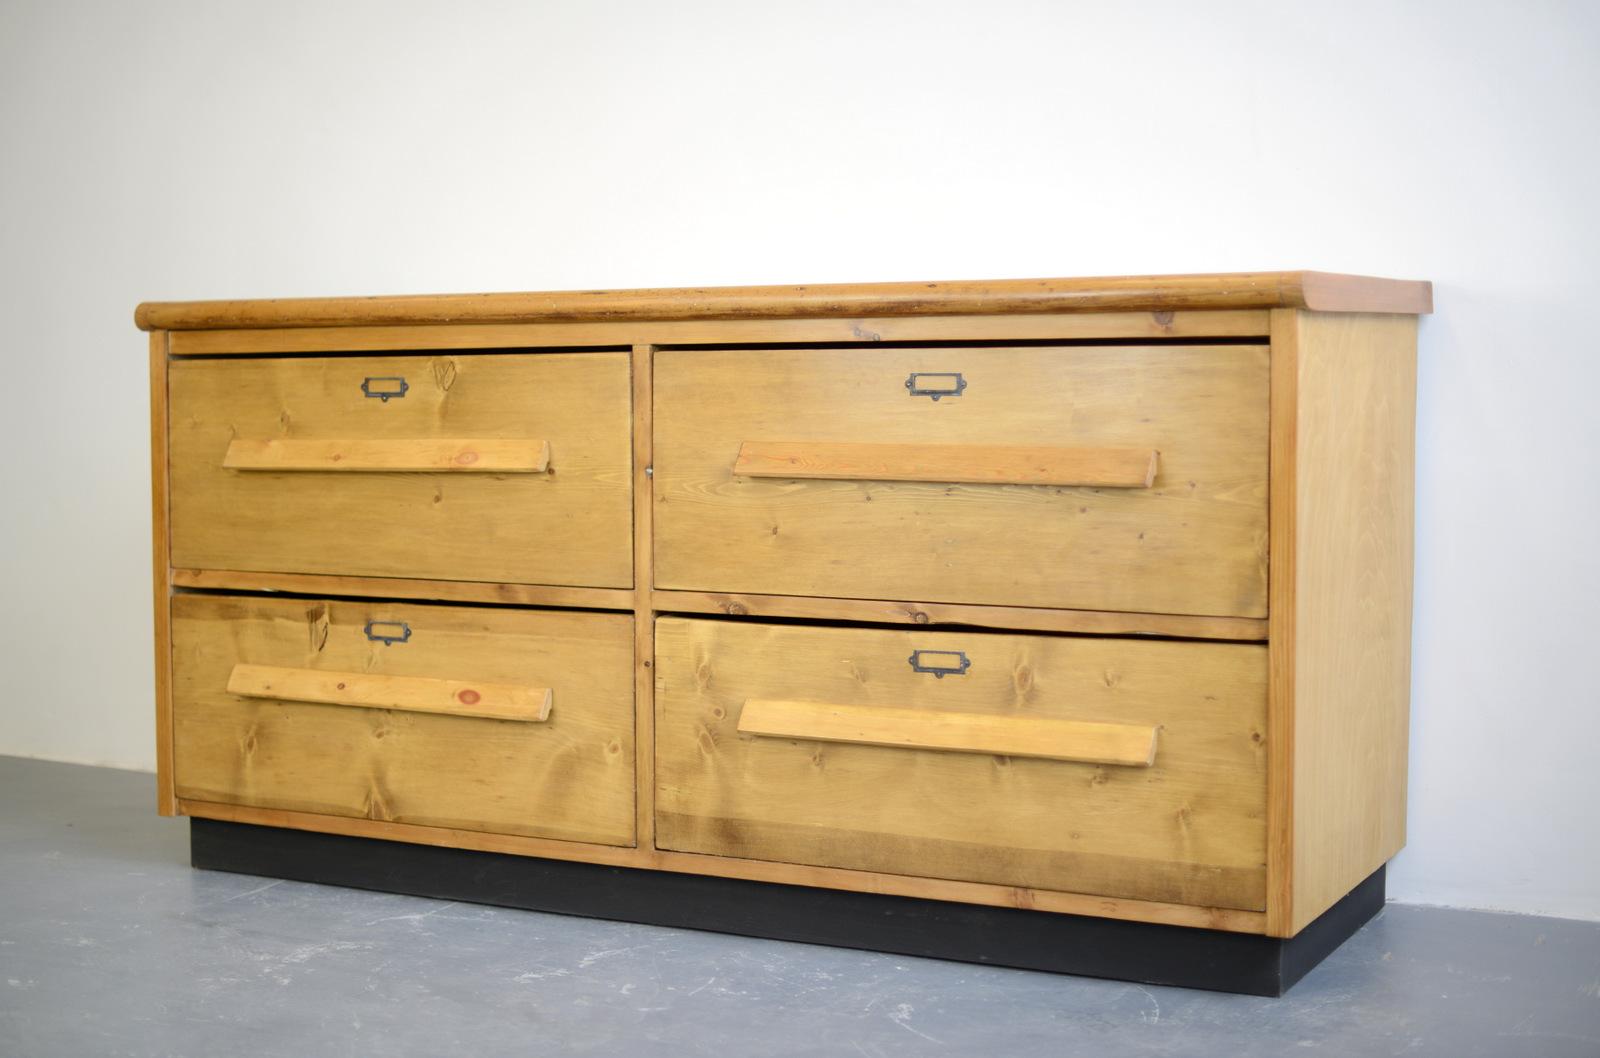 19th century pine tailors drawers

- 4 extra large drawers with original handles
- Copper card holders
- Dovetail jointed drawers
- Solid Pine top
- The cabinet originally came from a tailors in Cornwall where it was used to store rolls of